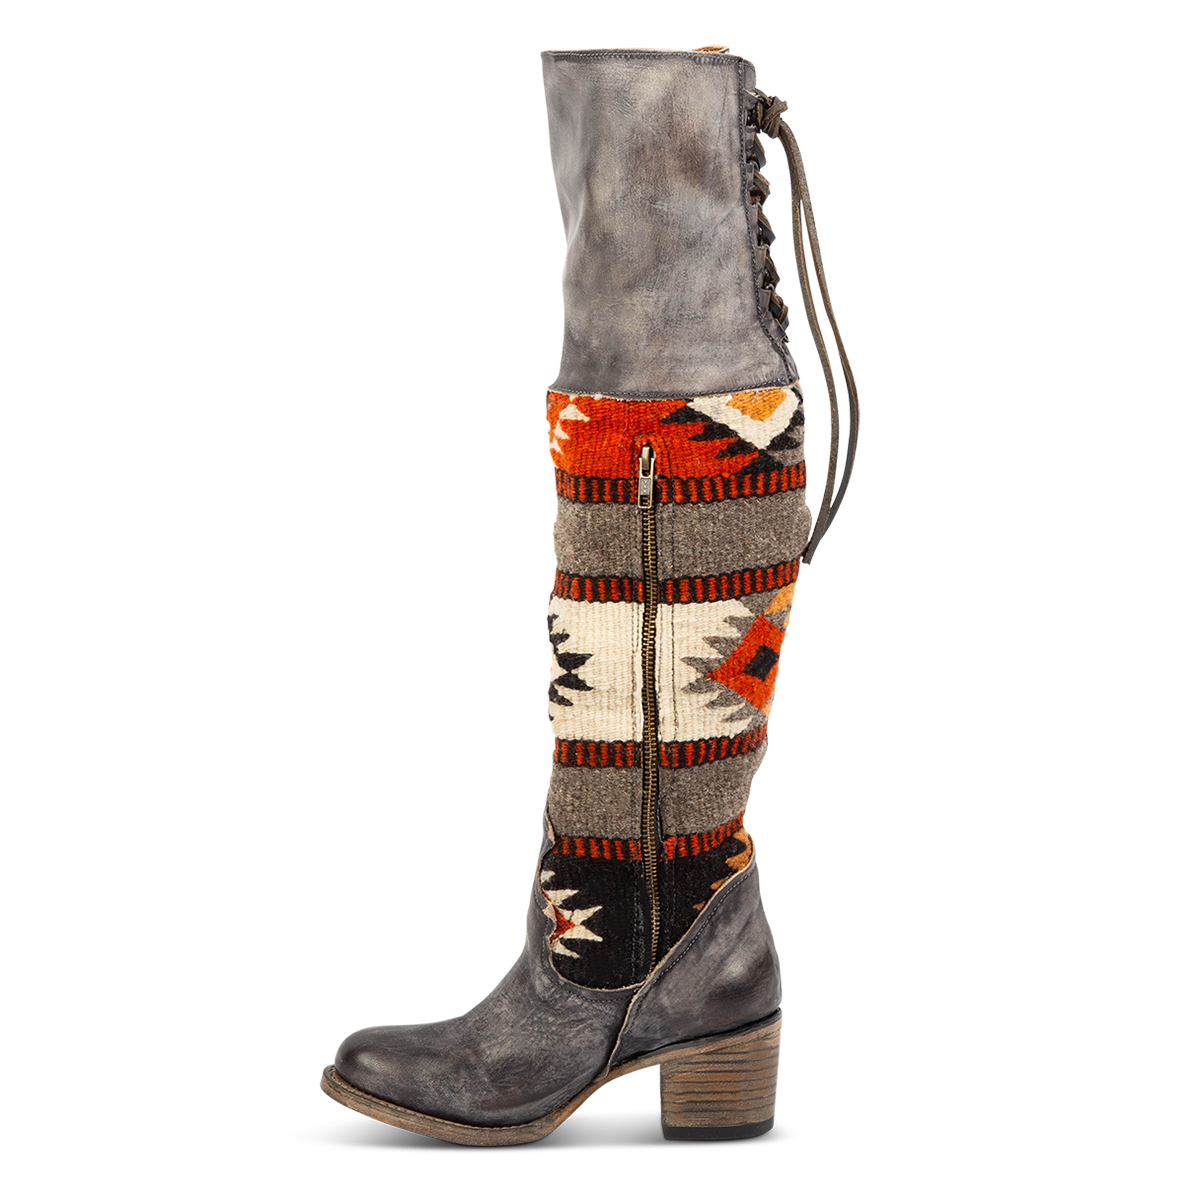 Inside view showing an inside working brass zipper, adjustable leather lacing, and multi-colored woven detailing on FREEBIRD women's Serape stone leather knee high boot